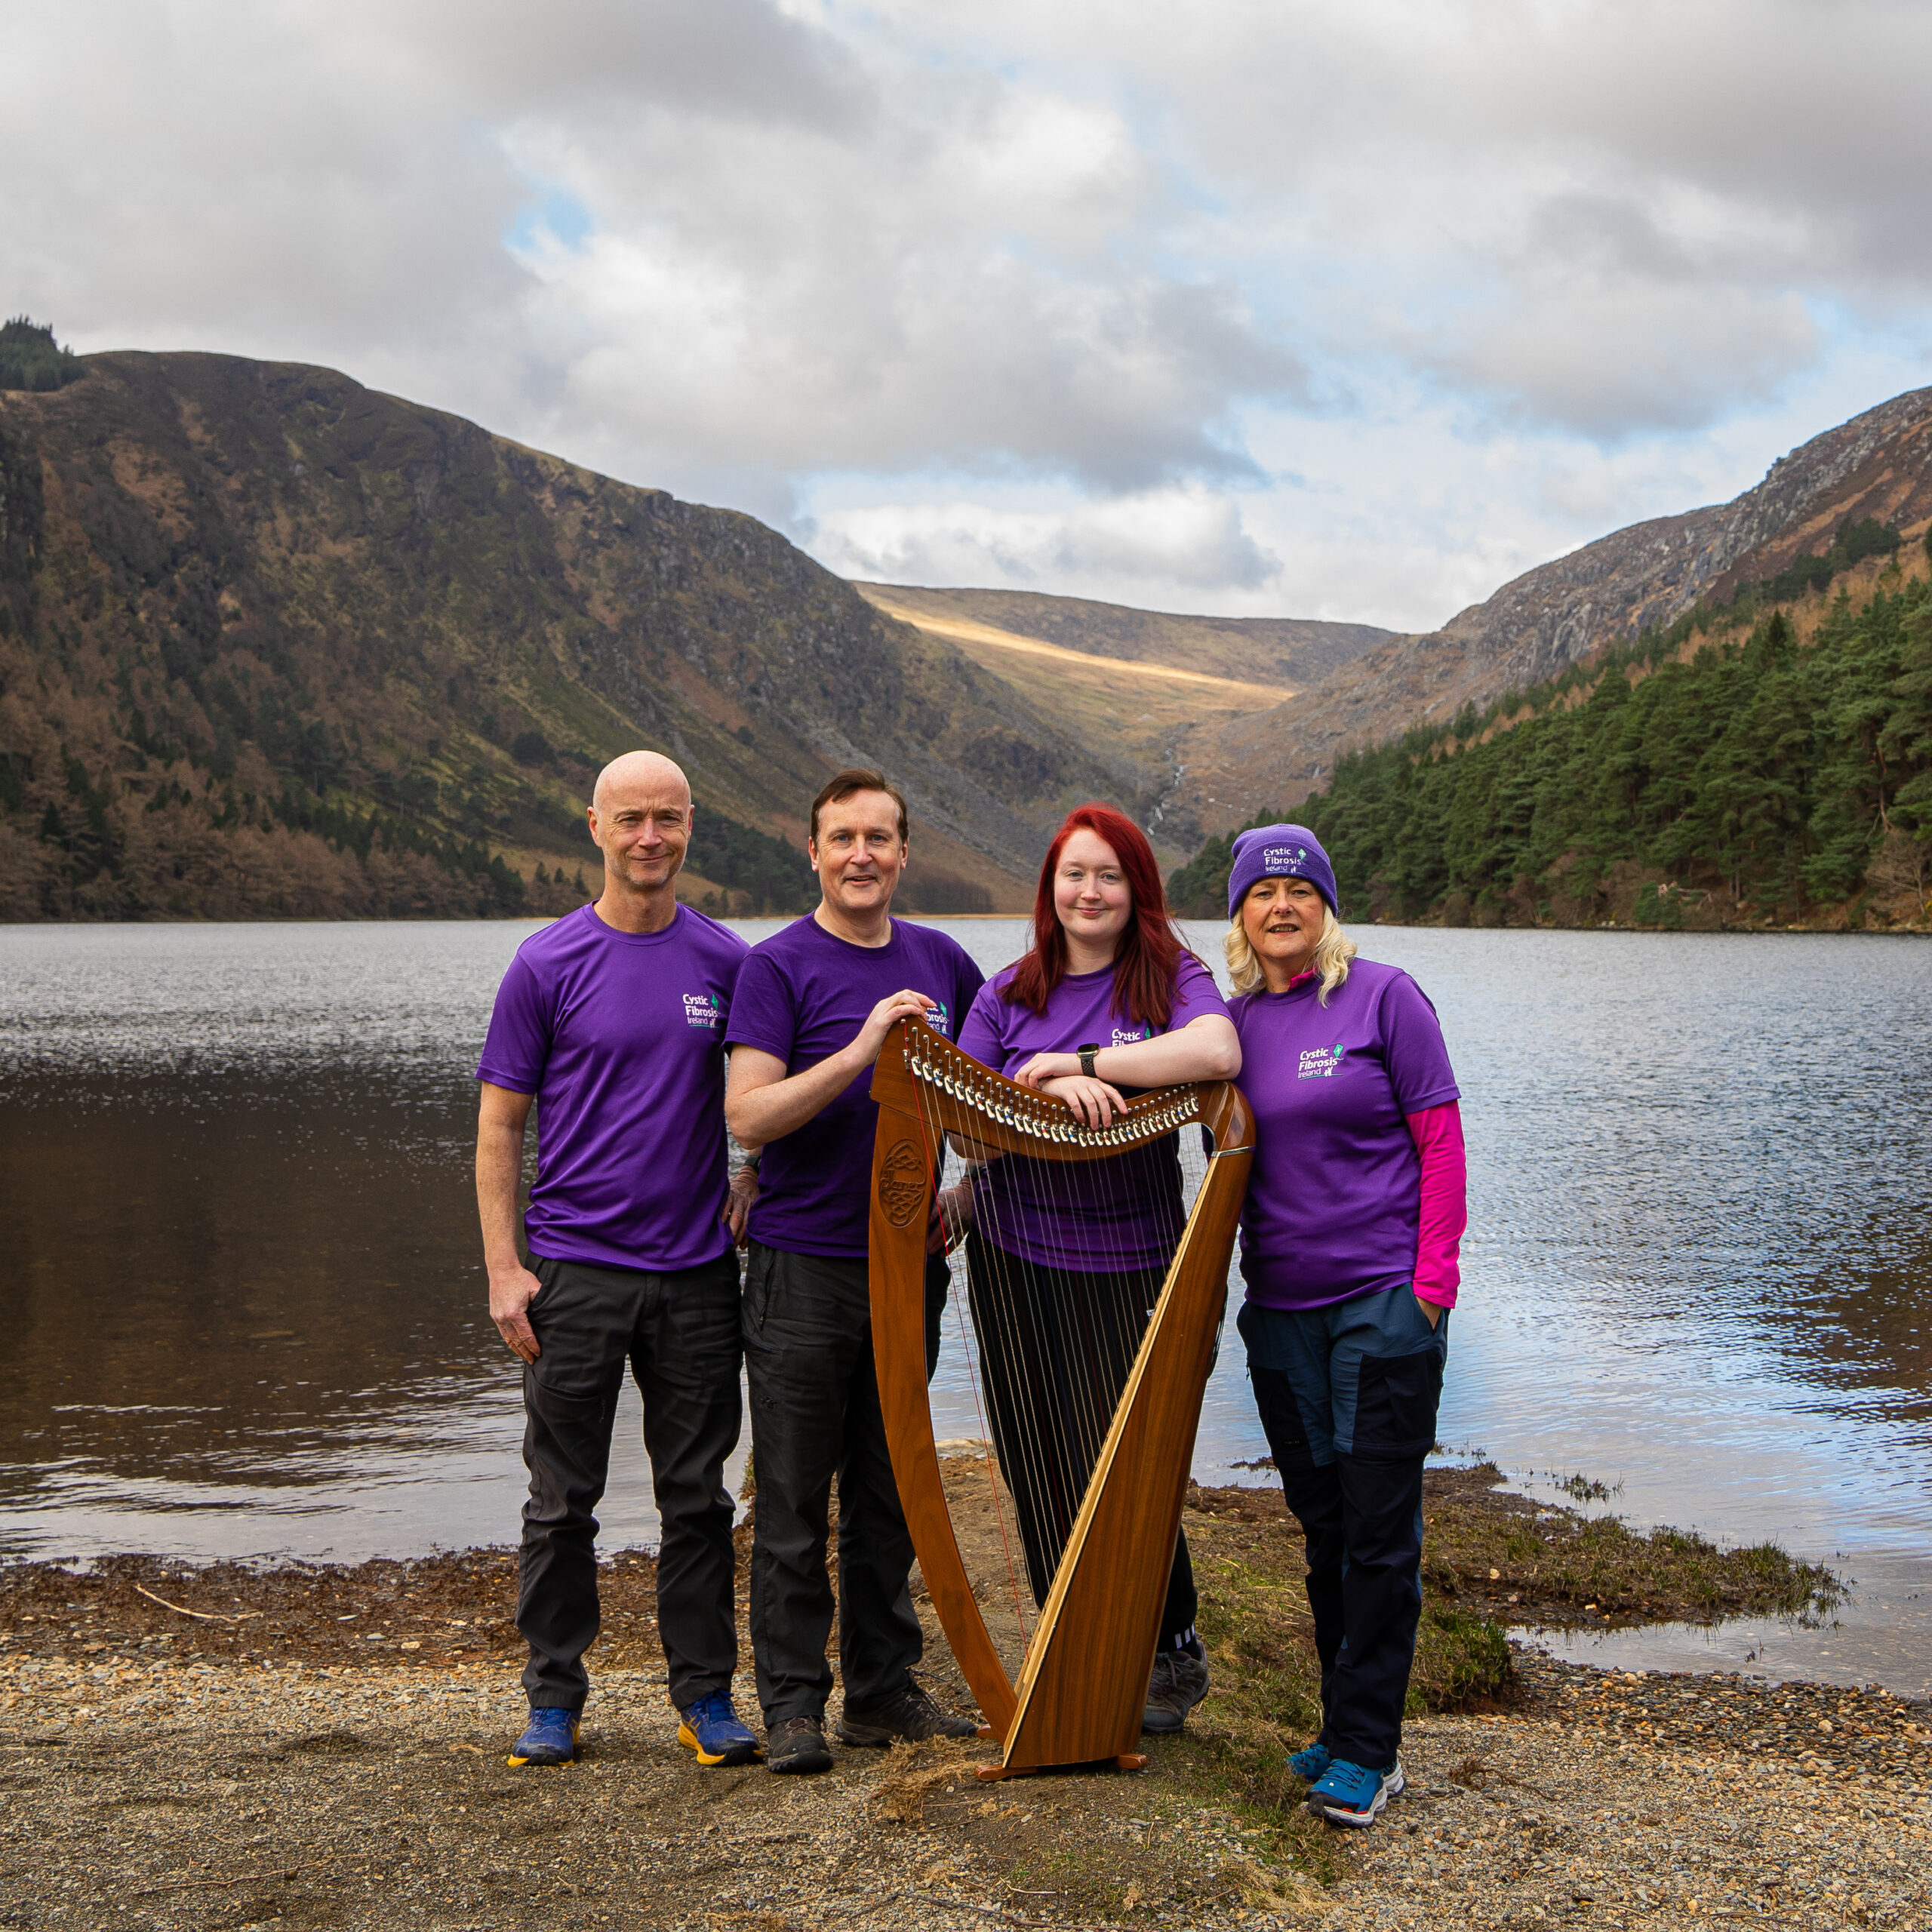 The Highest Harp Concert team during a training event in the Wicklow Mountains National Park in preparation for the Guinness World Record attempt on the 5,895m summit of Mount Kilimanjaro, Tanzania. The challenge is raising vital funds for Cystic Fibrosis Ireland. Pictured are Stephen Lappin; Sean Brady, Project Leader; Siobhan Brady (24), Harpist and Guinness World Record Holder and Caroline Heffernan (52) who has Cystic Fibrosis and will be joining the team in their quest to reach the summit.